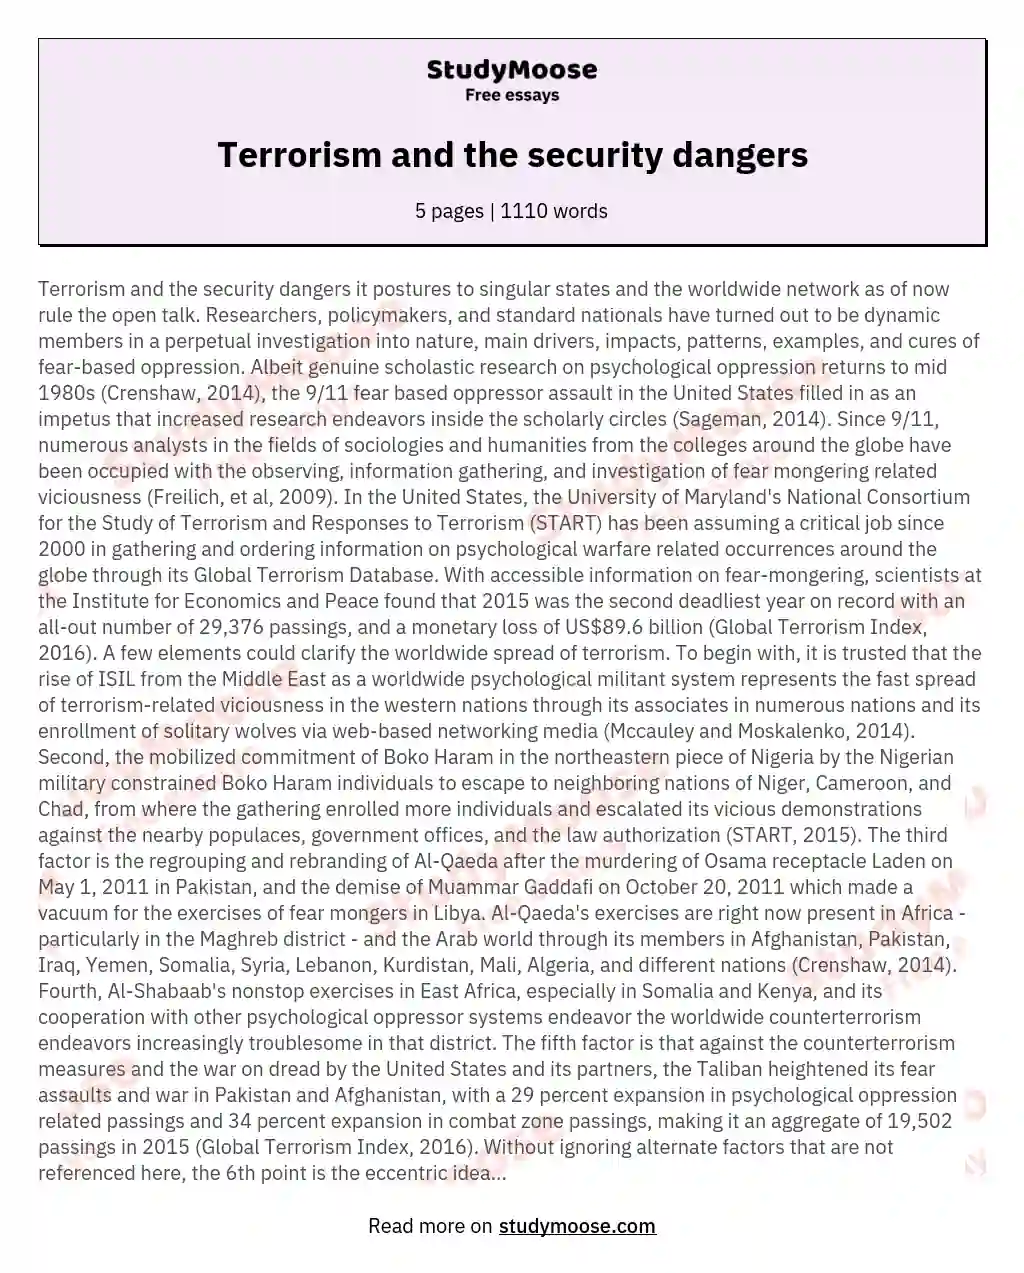 Terrorism and the security dangers essay